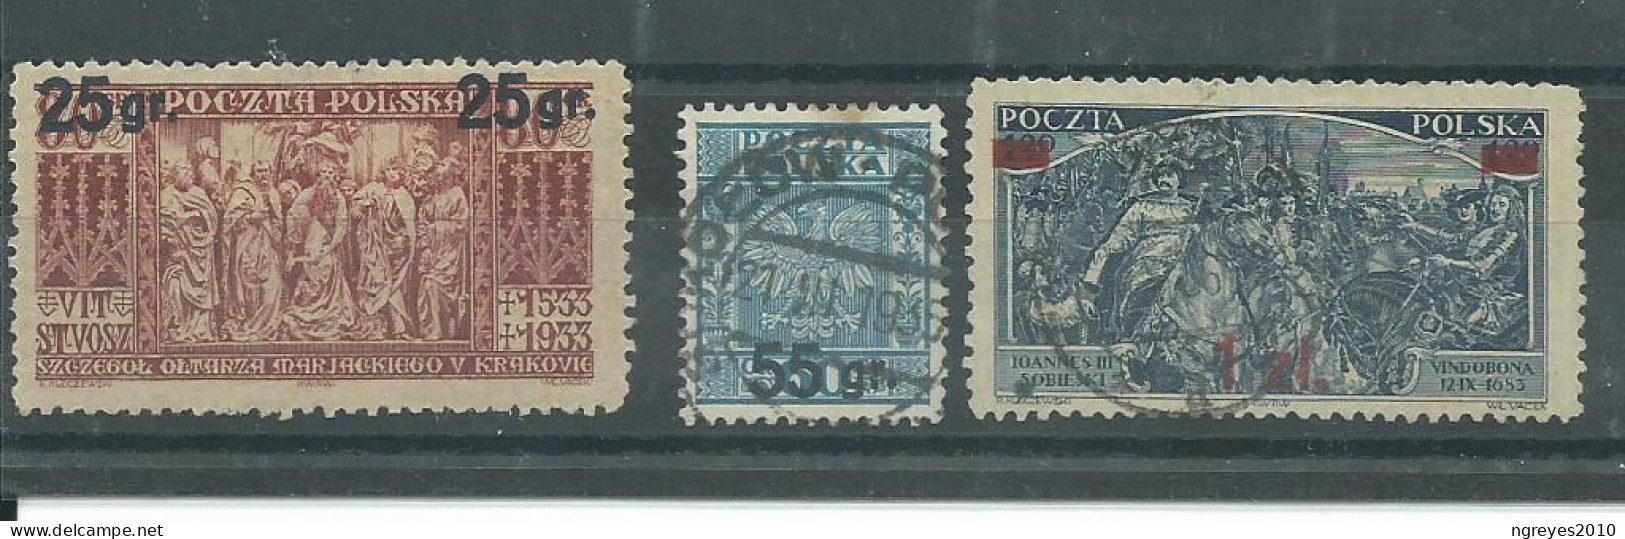 230044849  POLONIA  YVERT  Nº371/373  */USED MH/USED - Ungebraucht